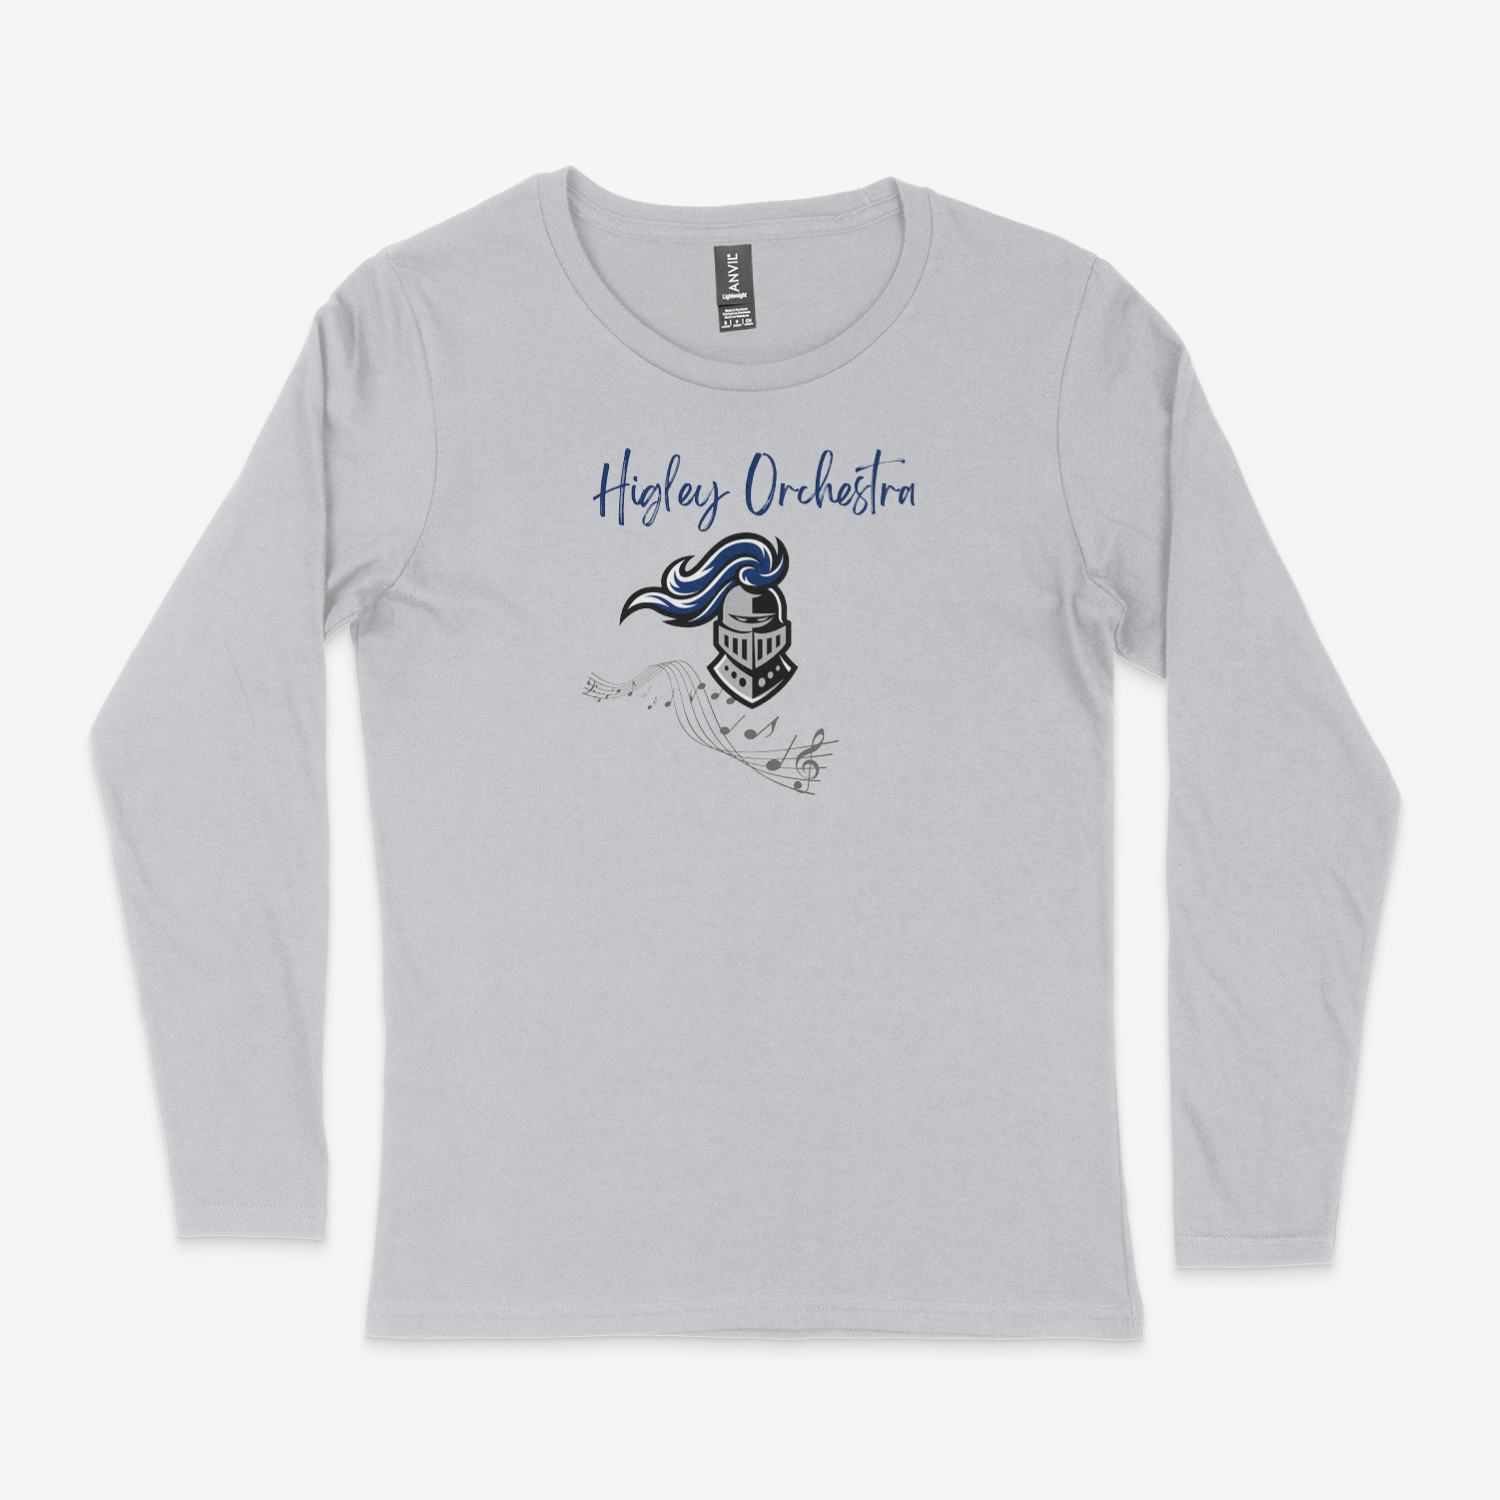 Higley Orchestra Long Sleeve T-Shirt - Single Graphic